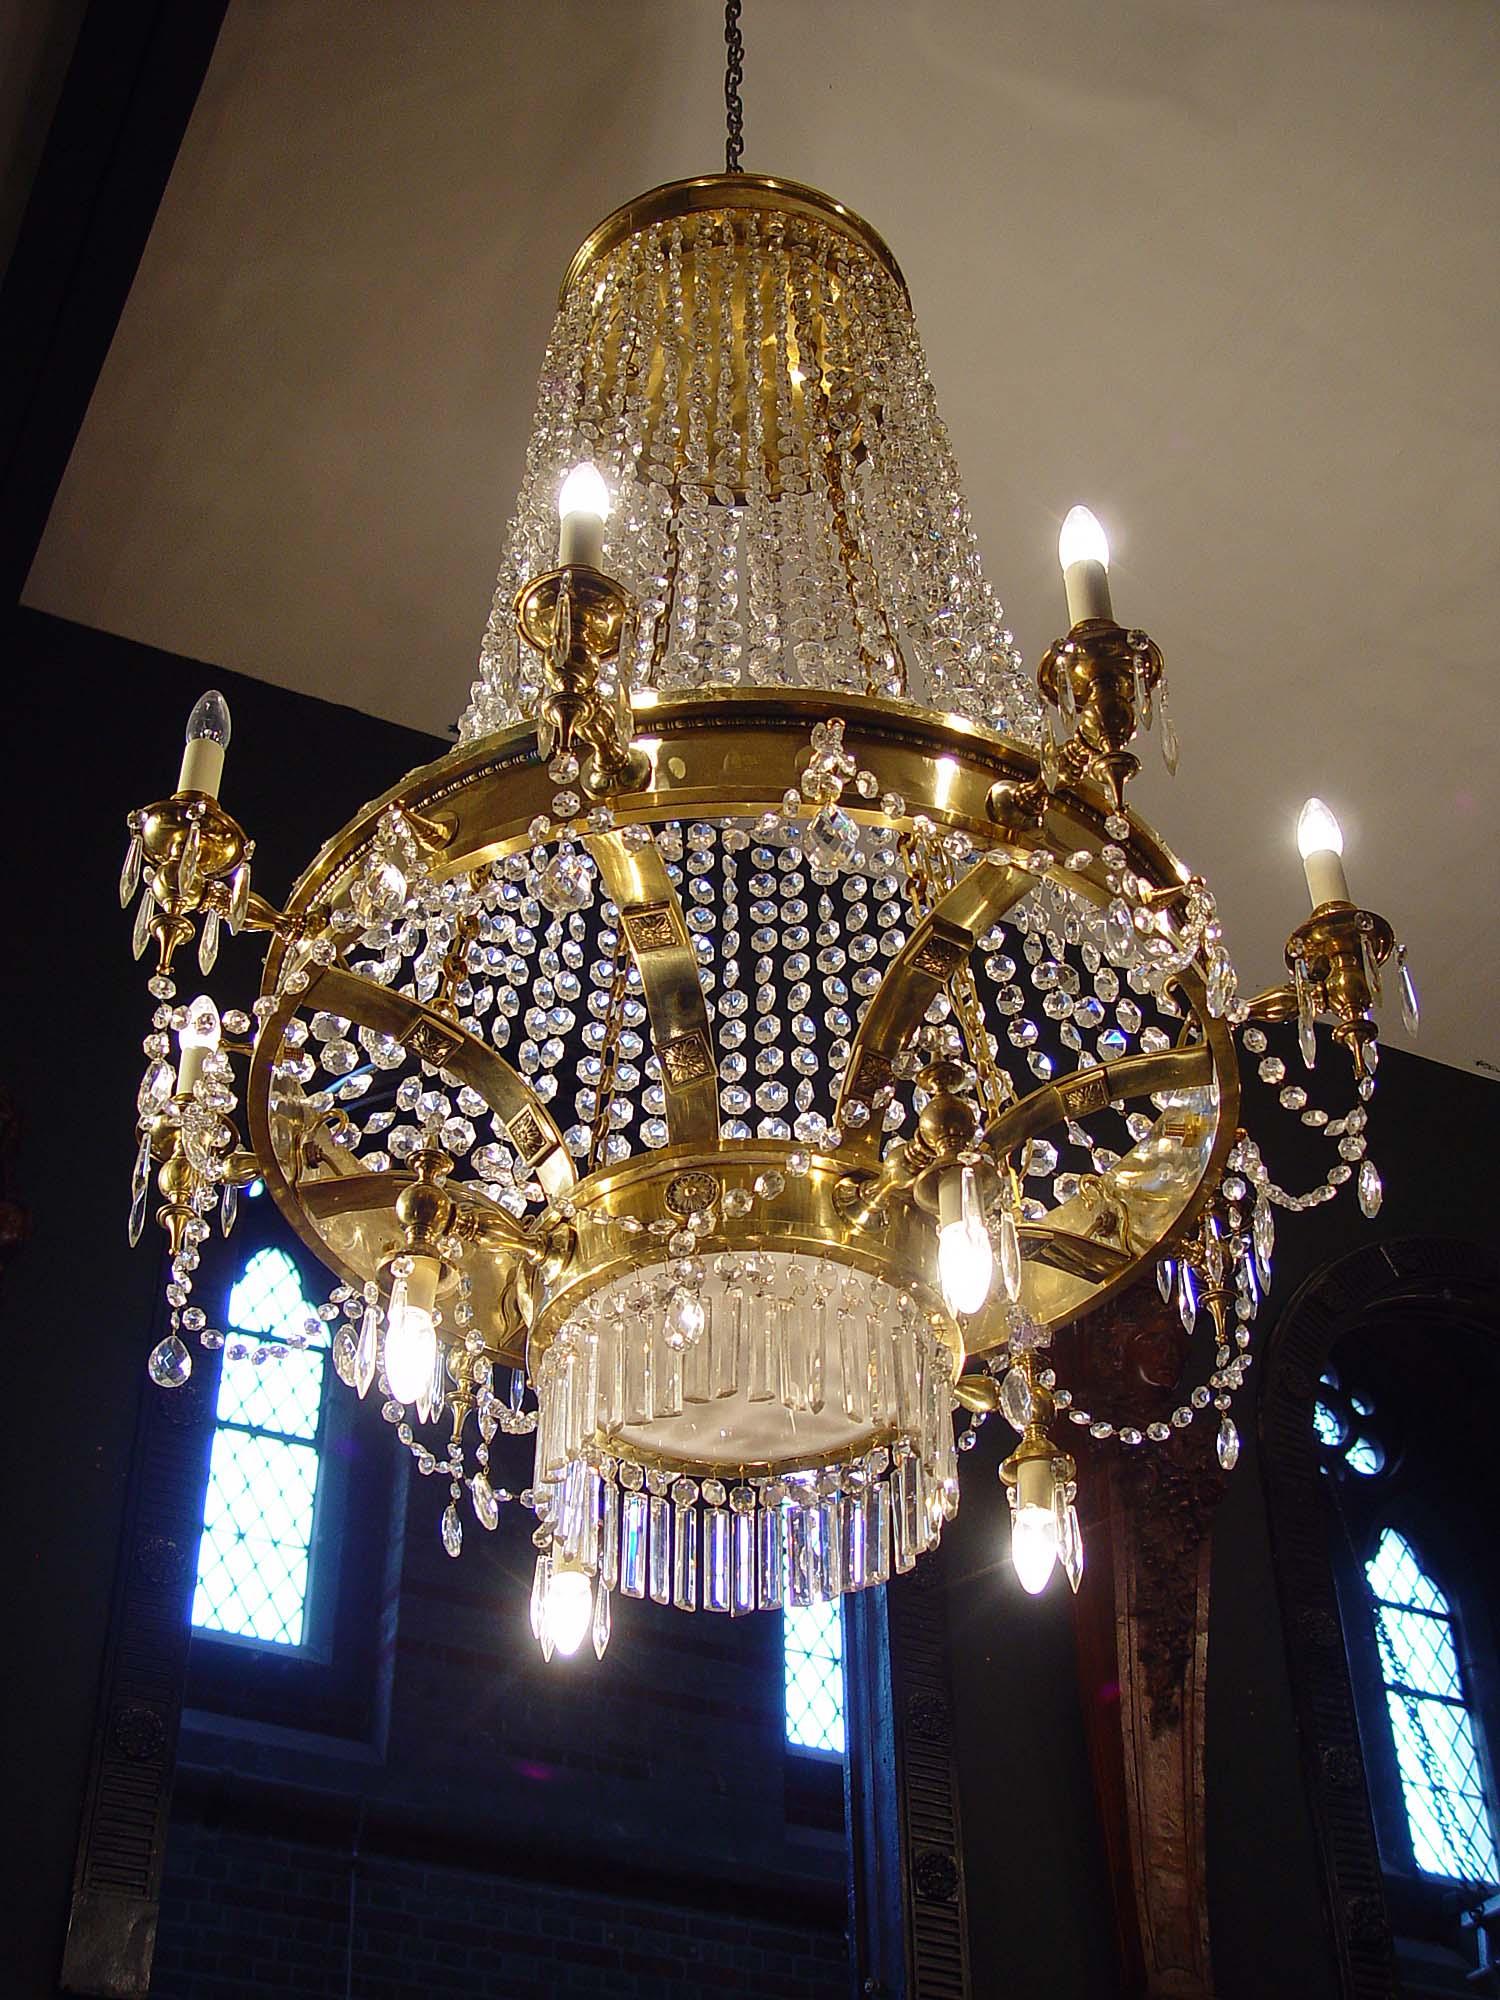 A large twelve-light 20th century gilt brass and crystal chandelier in the English Regency manner. The main rim with smaller lower rim applied with candle branches and strung with glass beads and pendants. The brass structure decorated with rosette